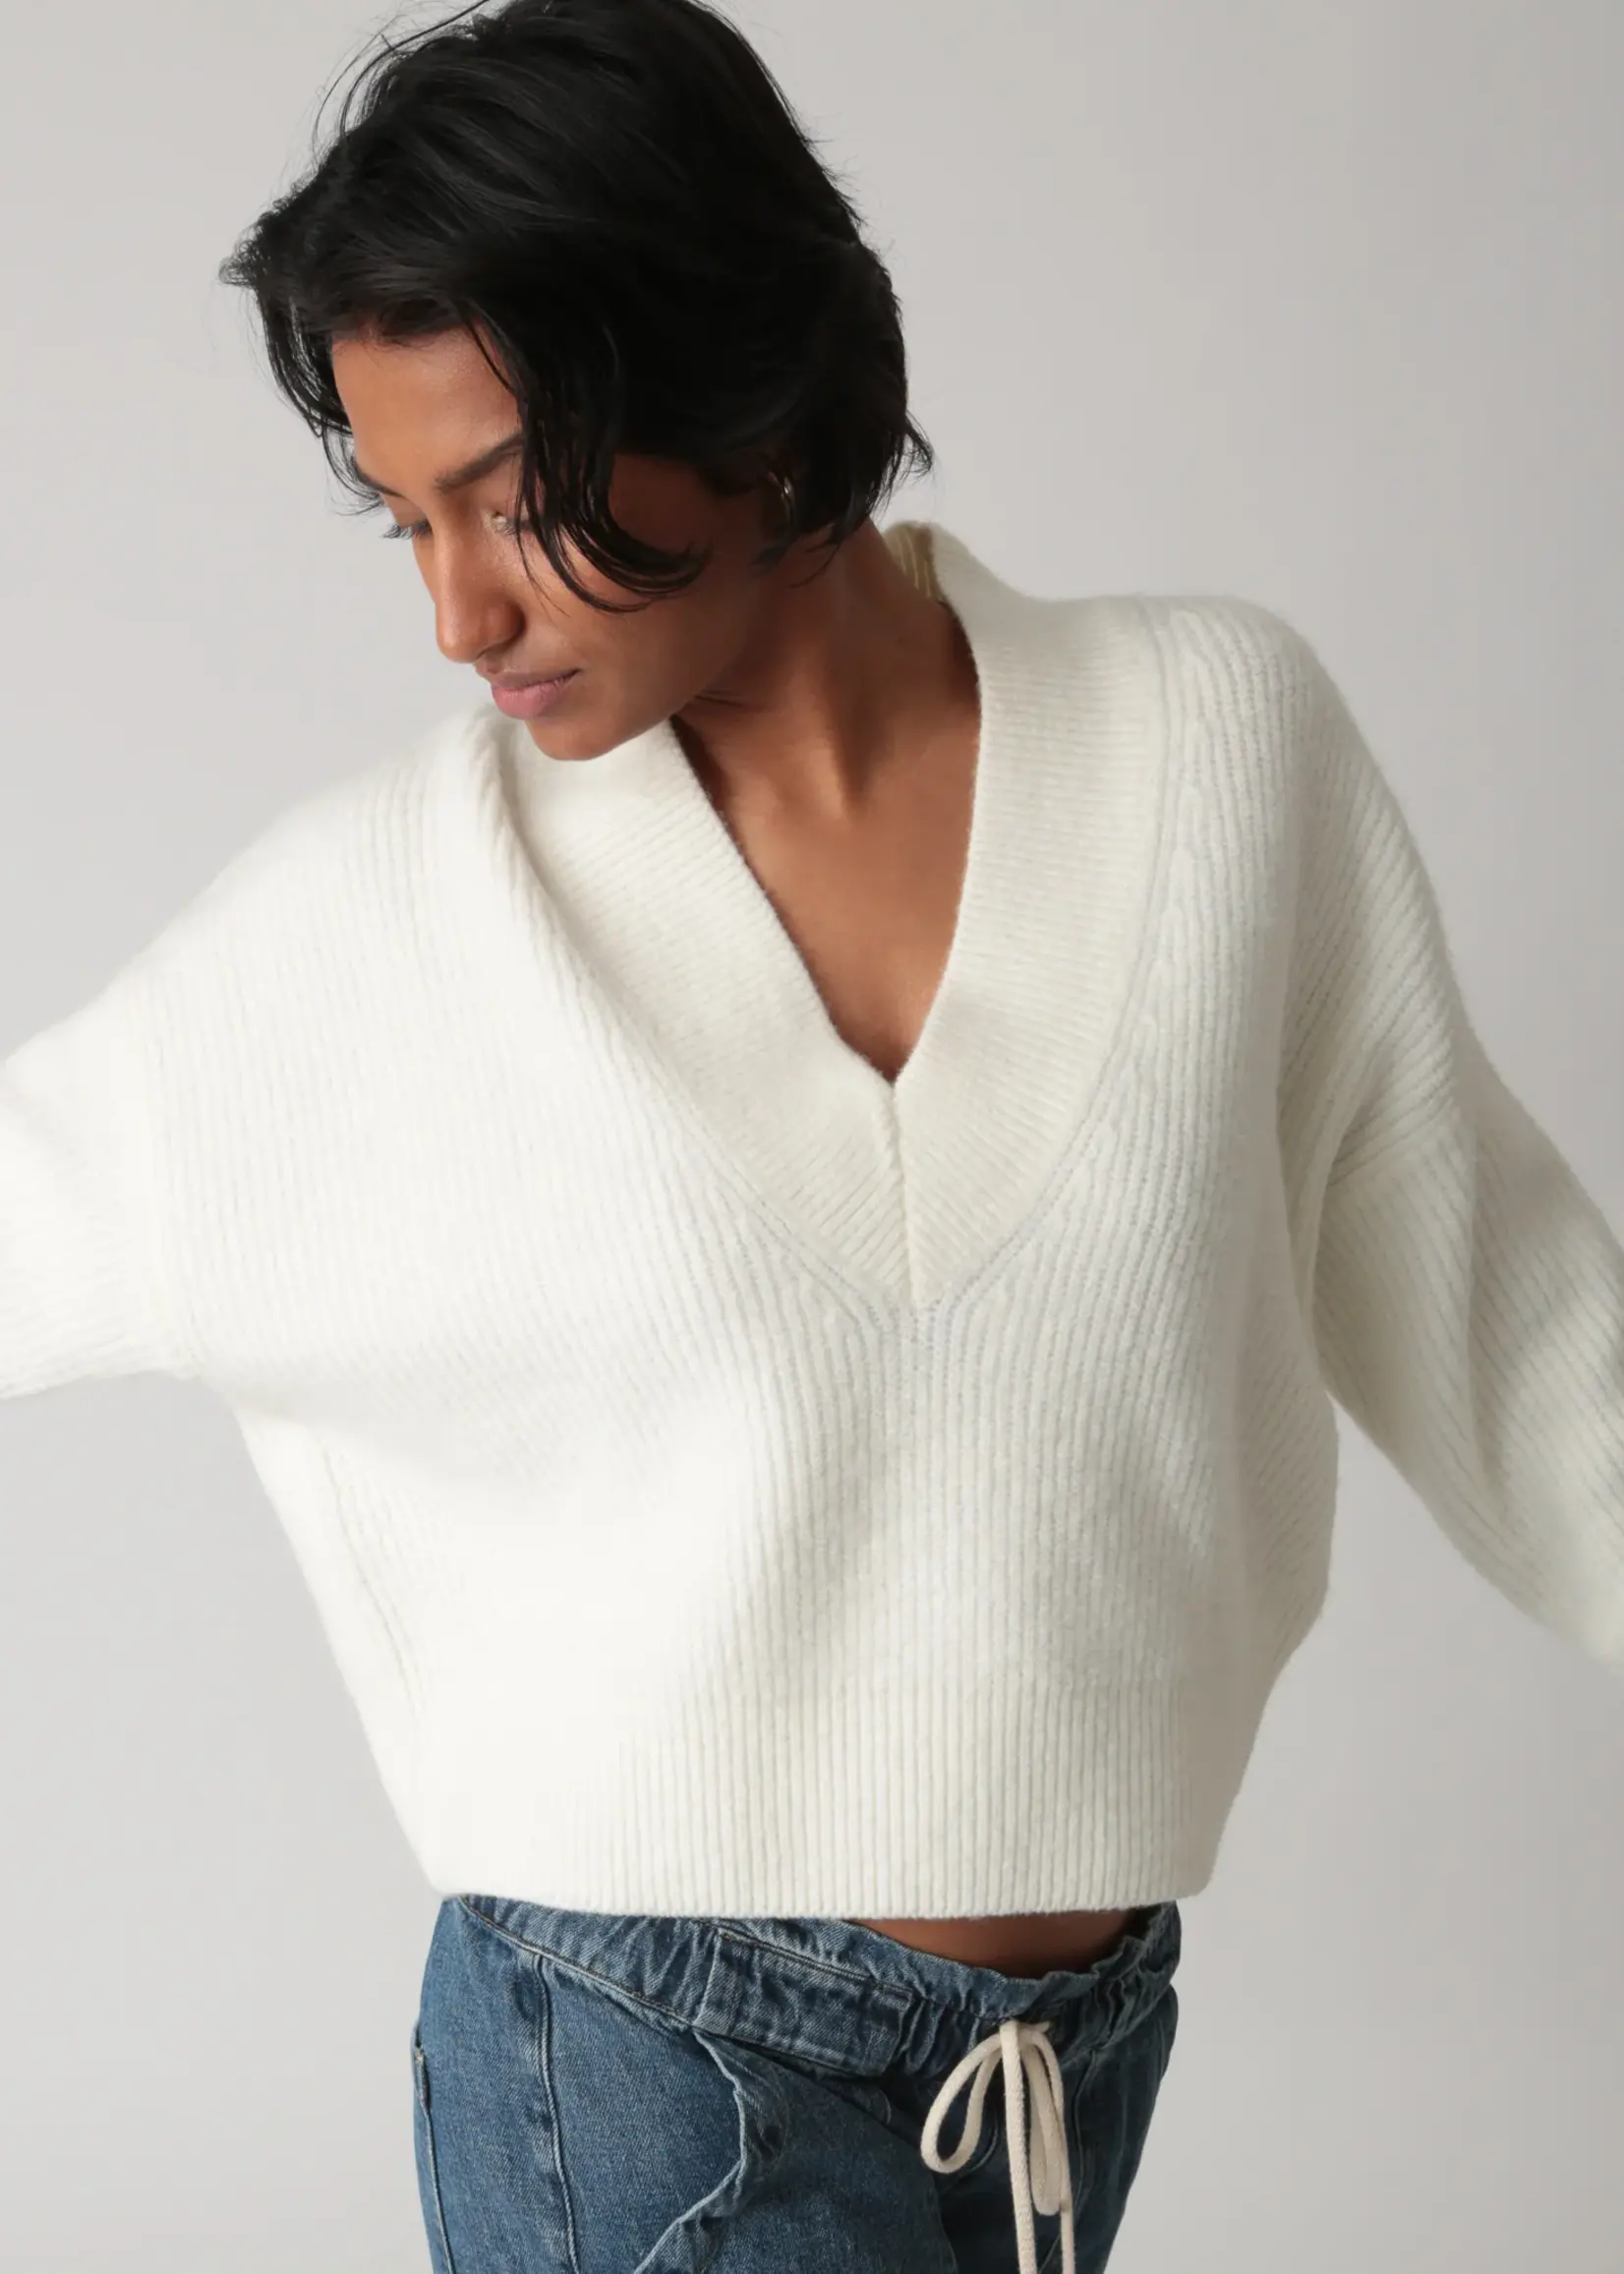 Electric & Rose Roux Sweater- Whisper